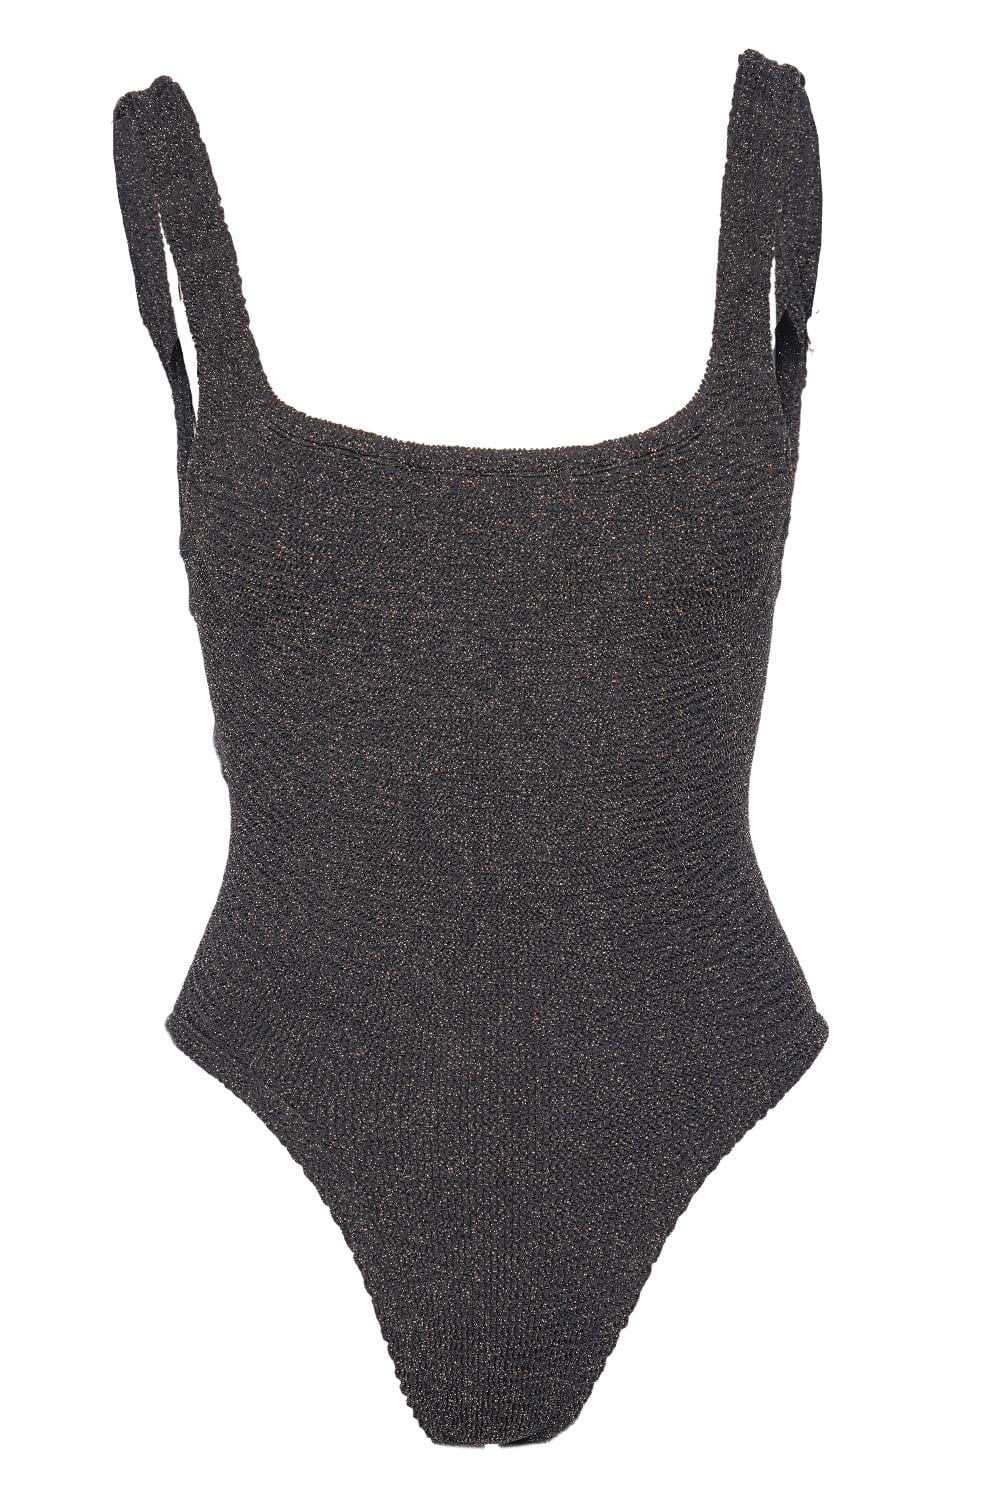 Hunza G Black Shimmer Square Neck One Piece Swimsuit